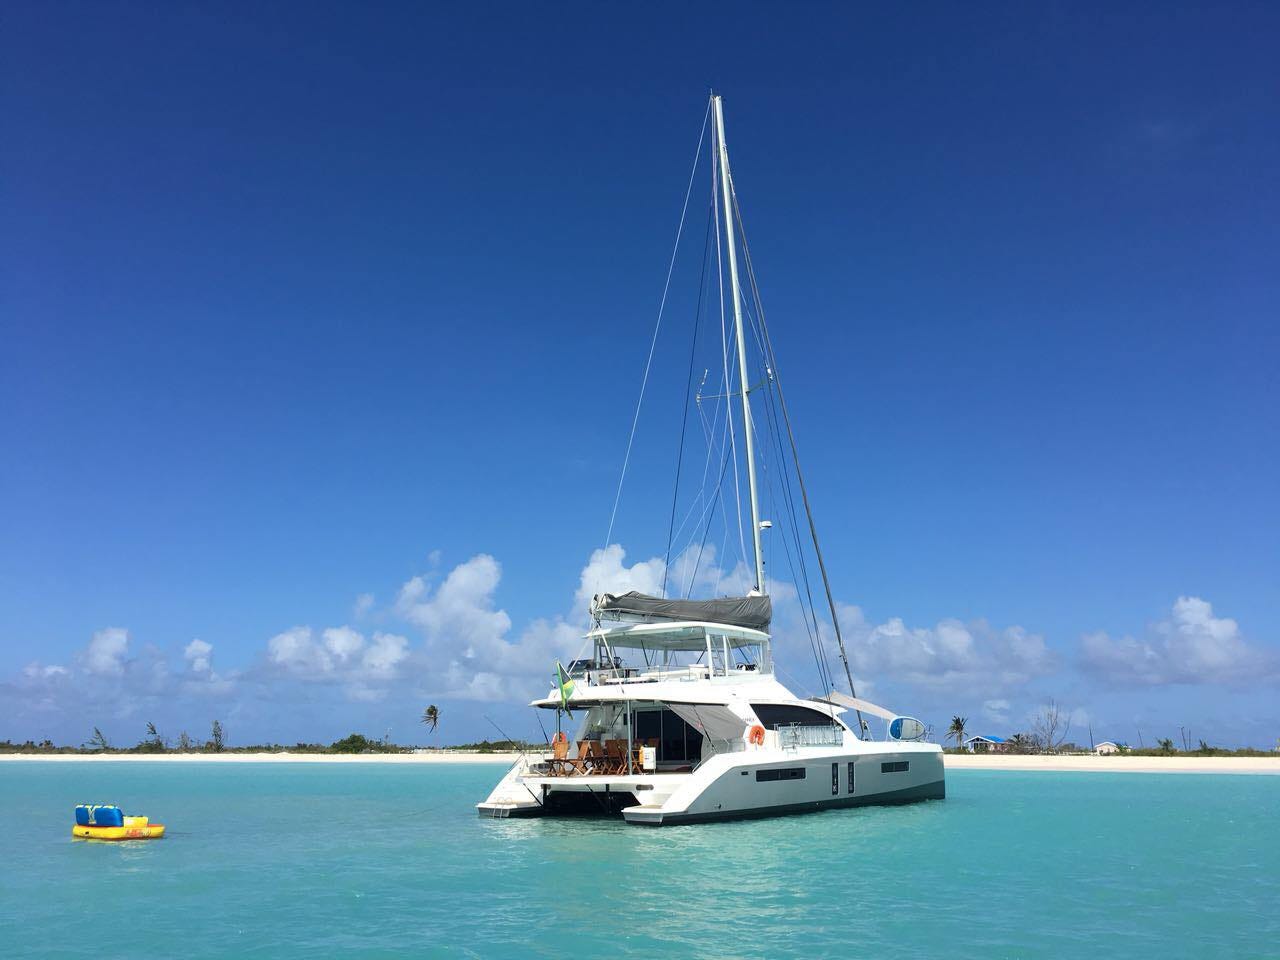 The Annex charter boat in the Caribbean